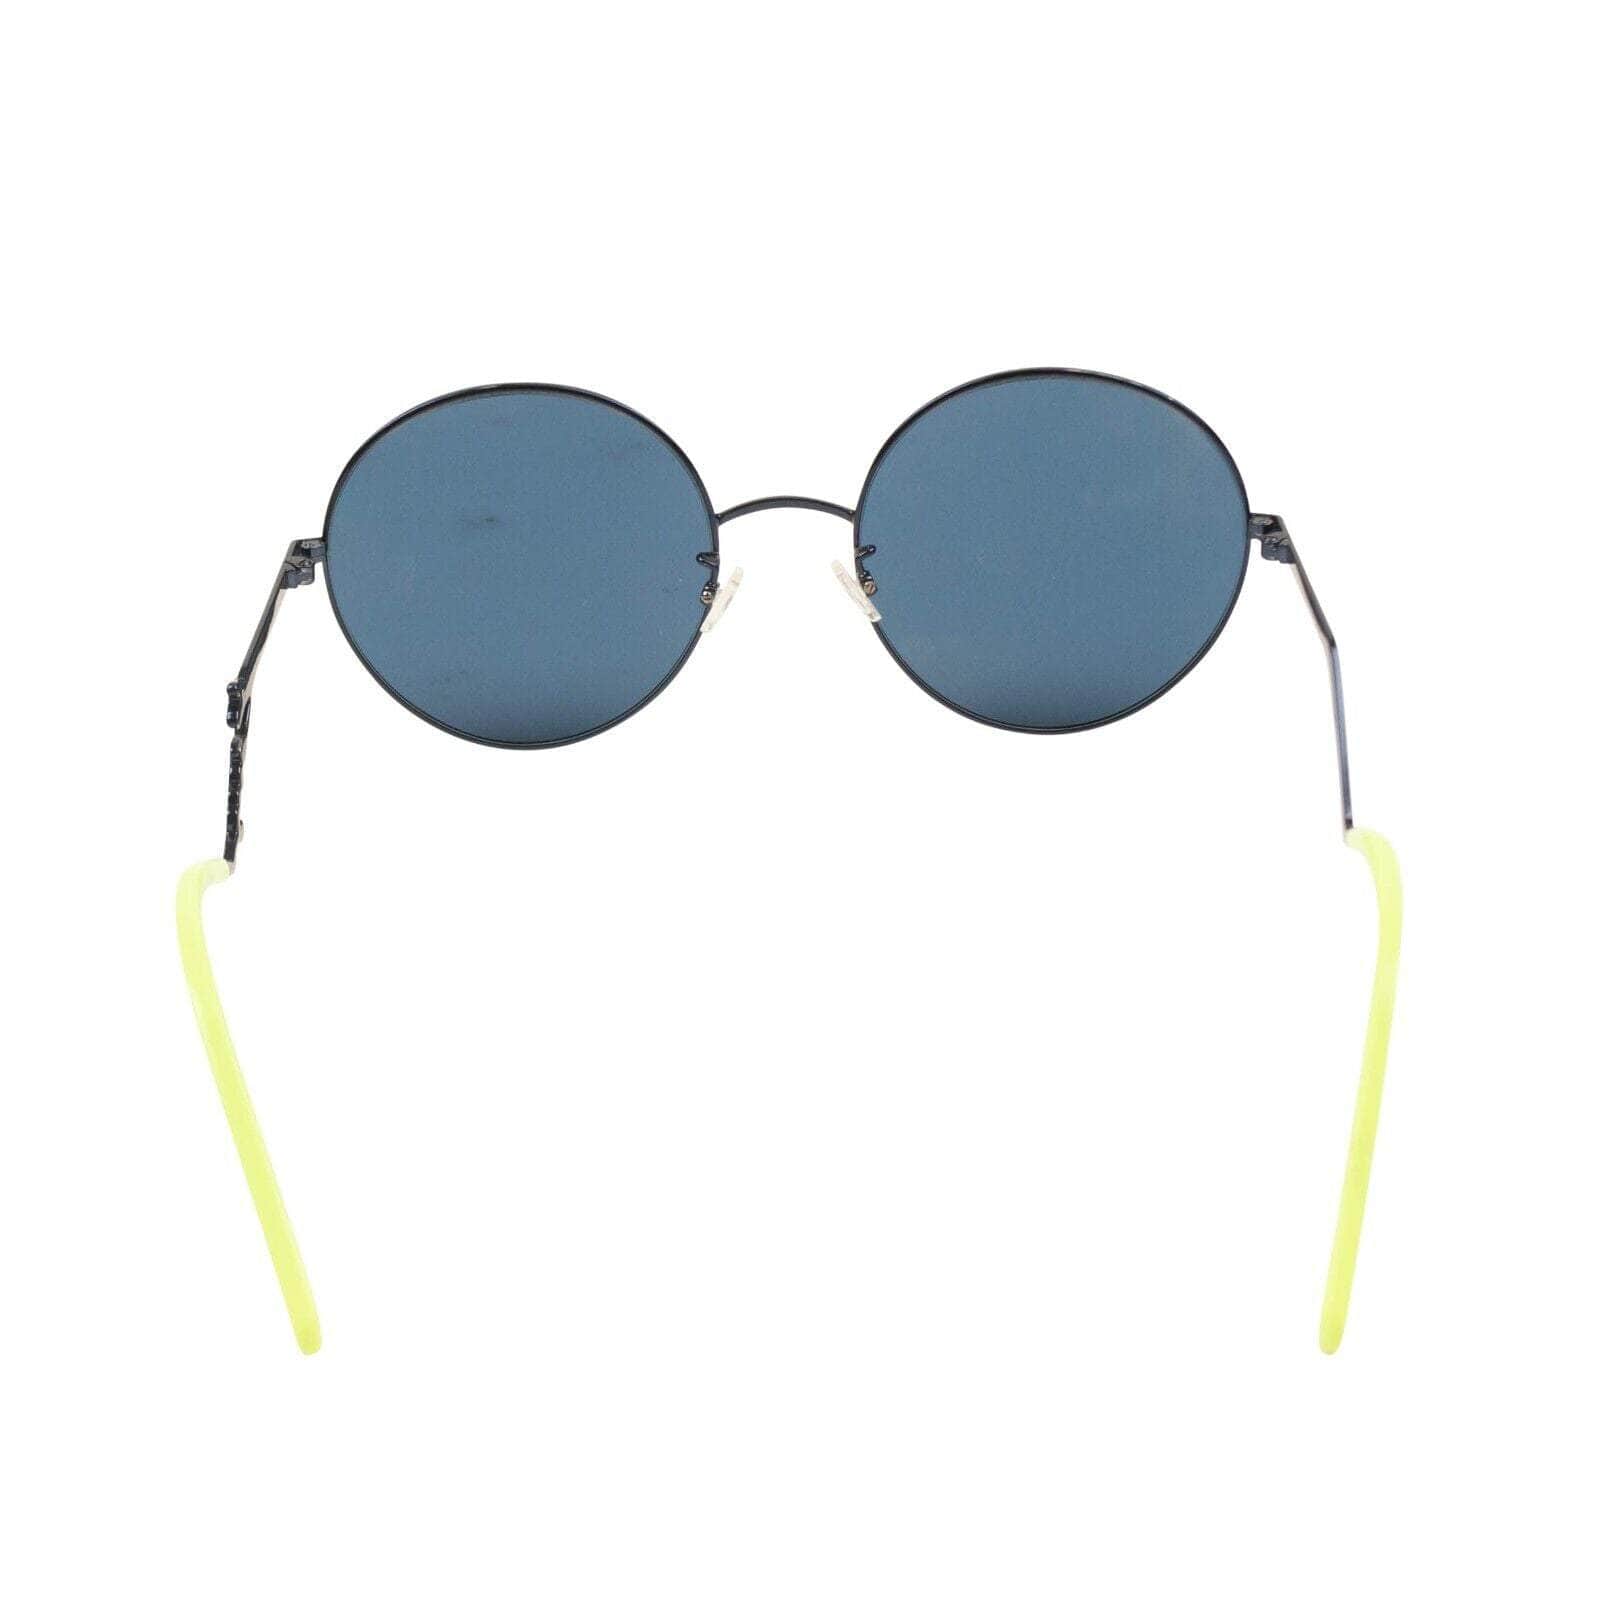 Kenzo Paris channelenable-all, chicmi, couponcollection, gender-mens, gender-womens, kenzo-paris, main-accessories, mens-shoes, size-os, under-250, unisex-eyewear OS Black Mirror Neon Yellow Circle Wire Sunglasses 95-KNZ-3027/OS 95-KNZ-3027/OS